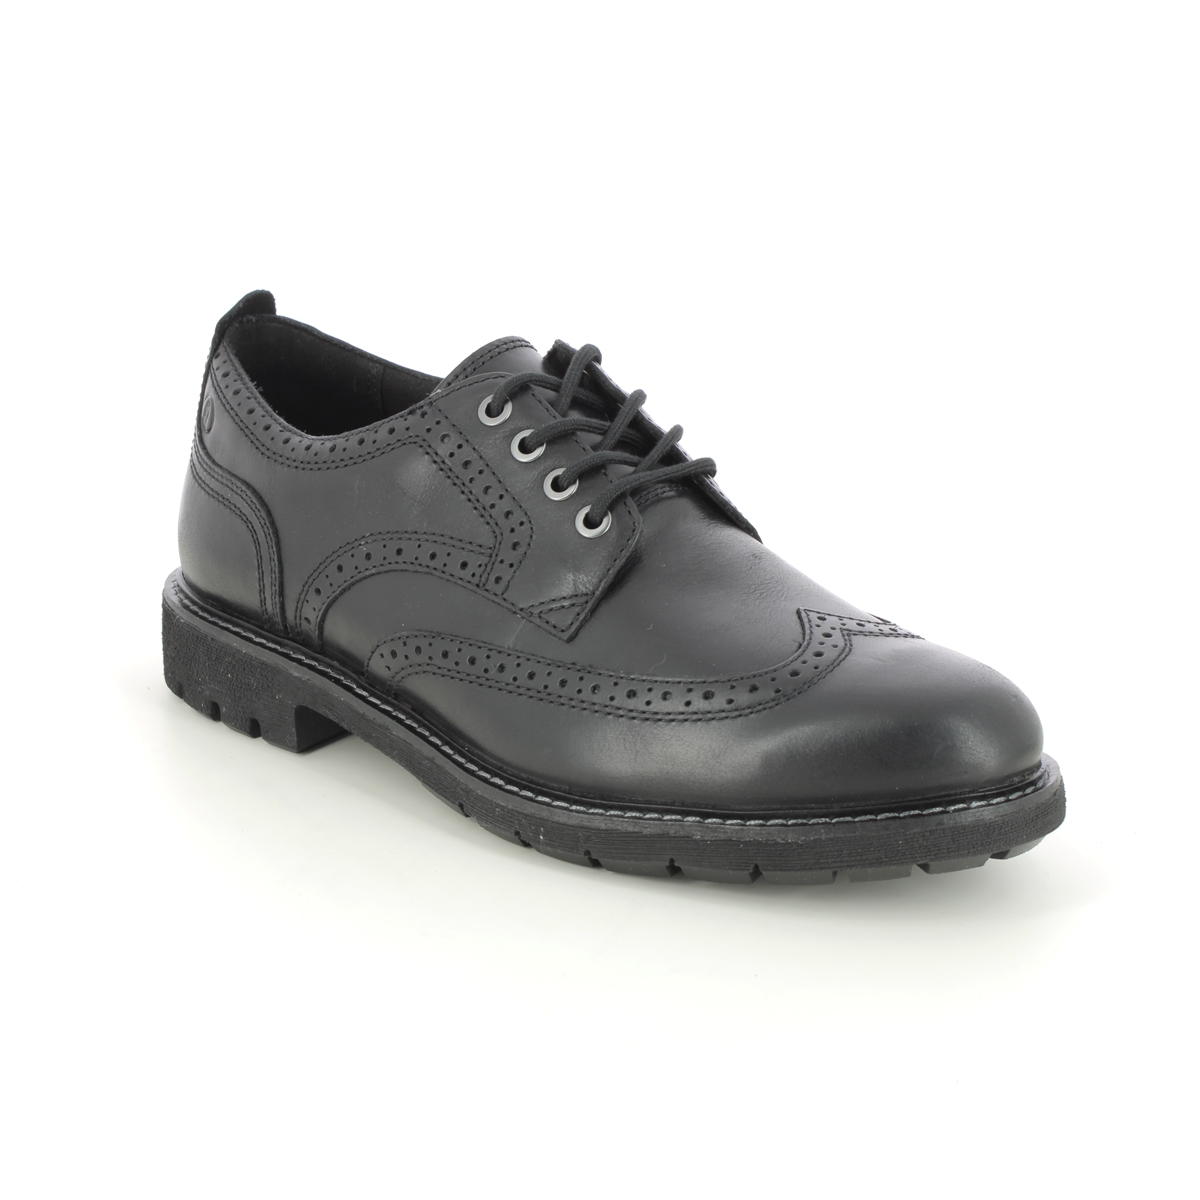 Clarks Batcombe Far Wing Black Leather Mens Brogues 734387G In Size 9 In Plain Black Leather G Width Fitting